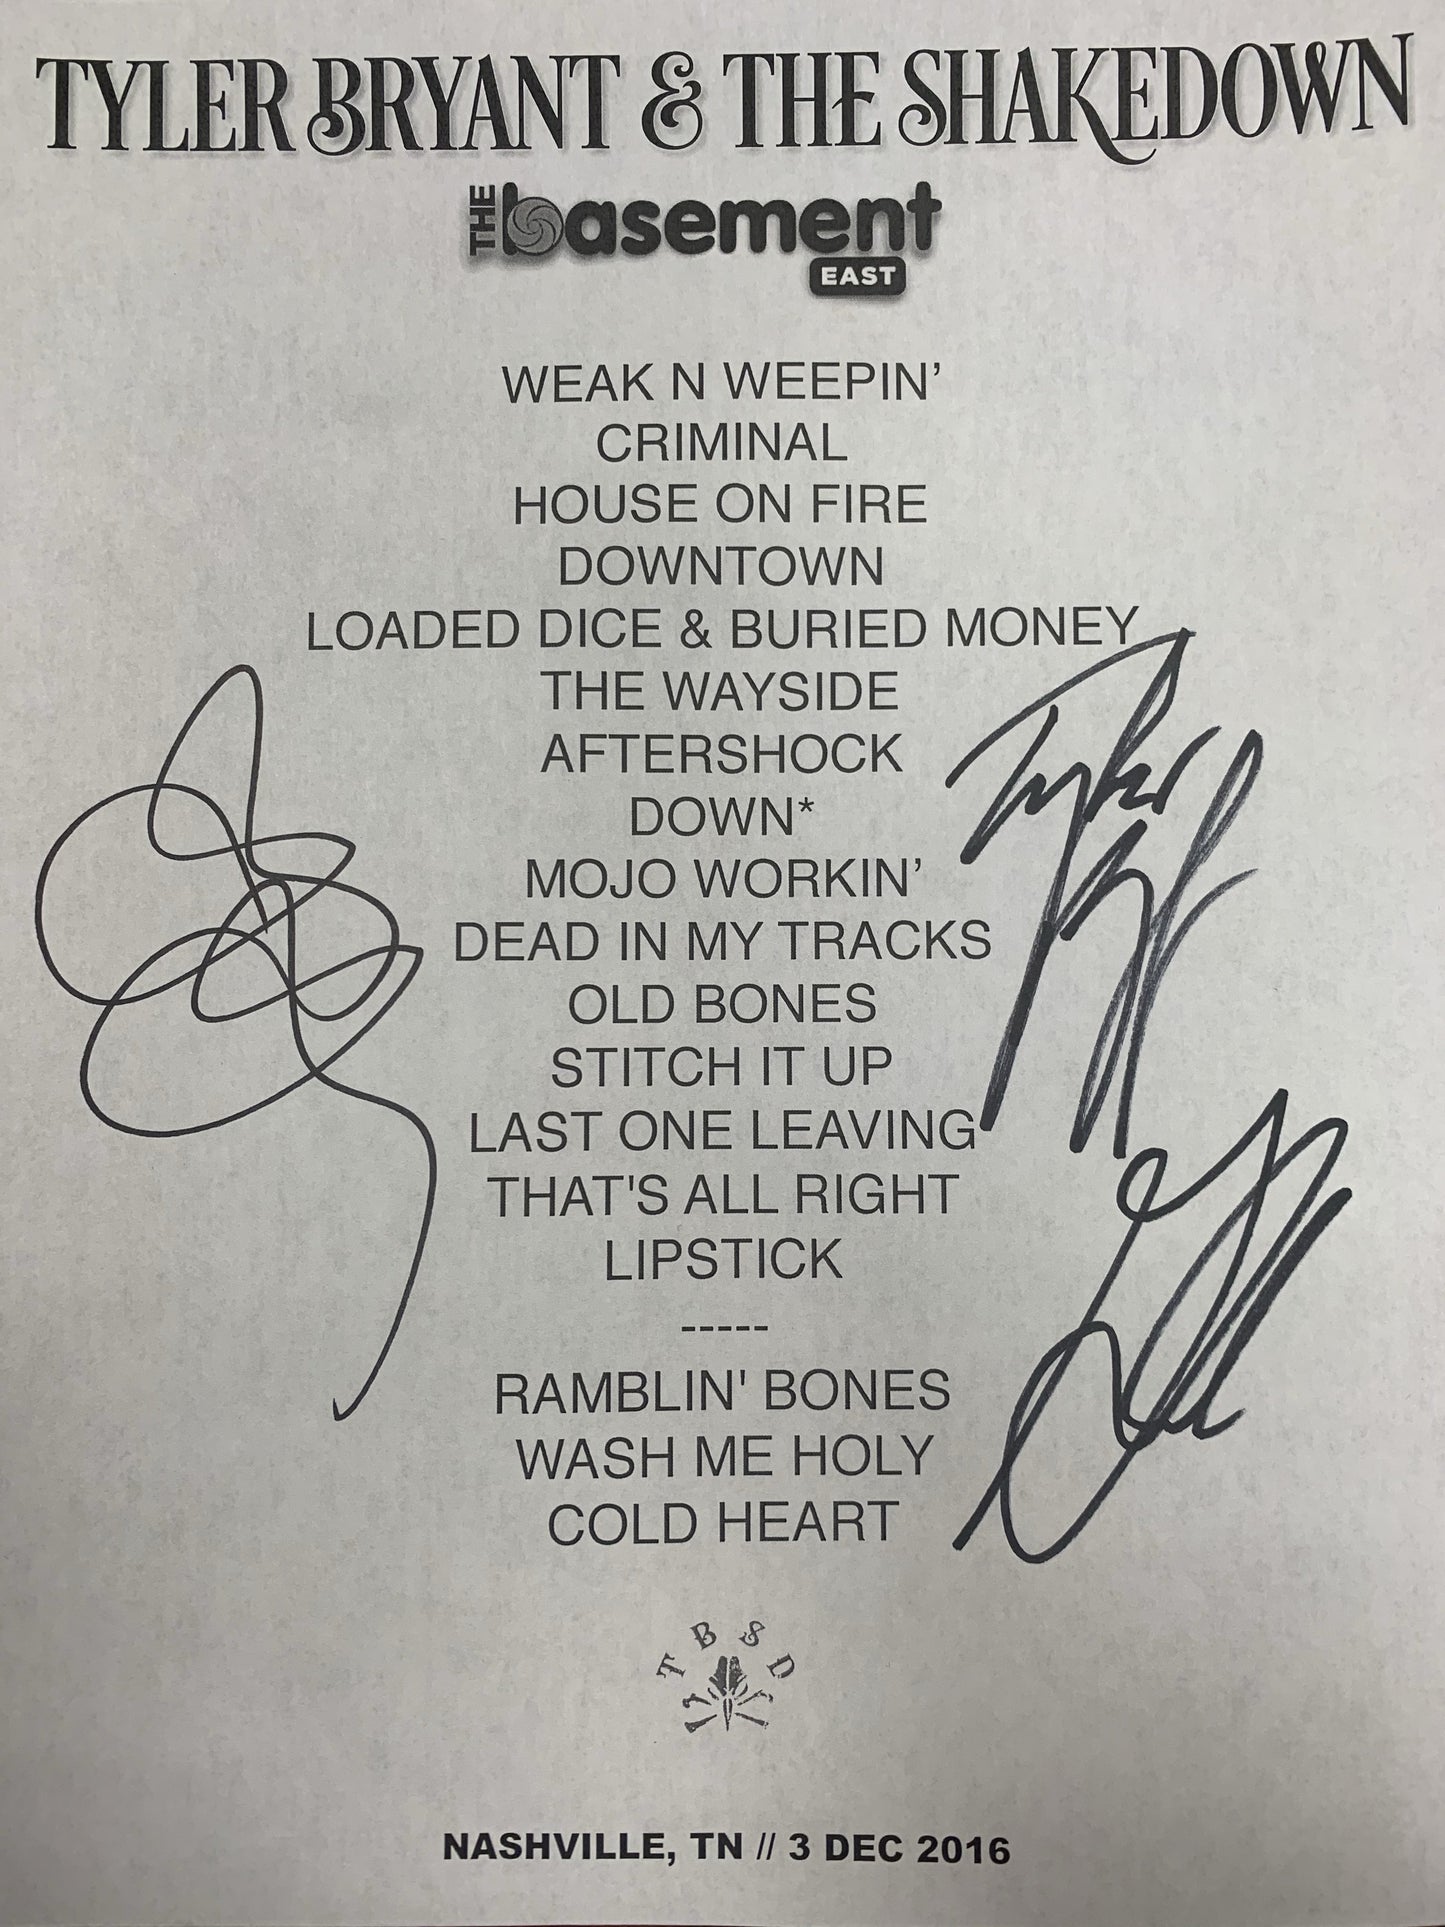 Tyler Bryant & The Shakedown - Truth and Lies Vinyl LP With Signed Setlist